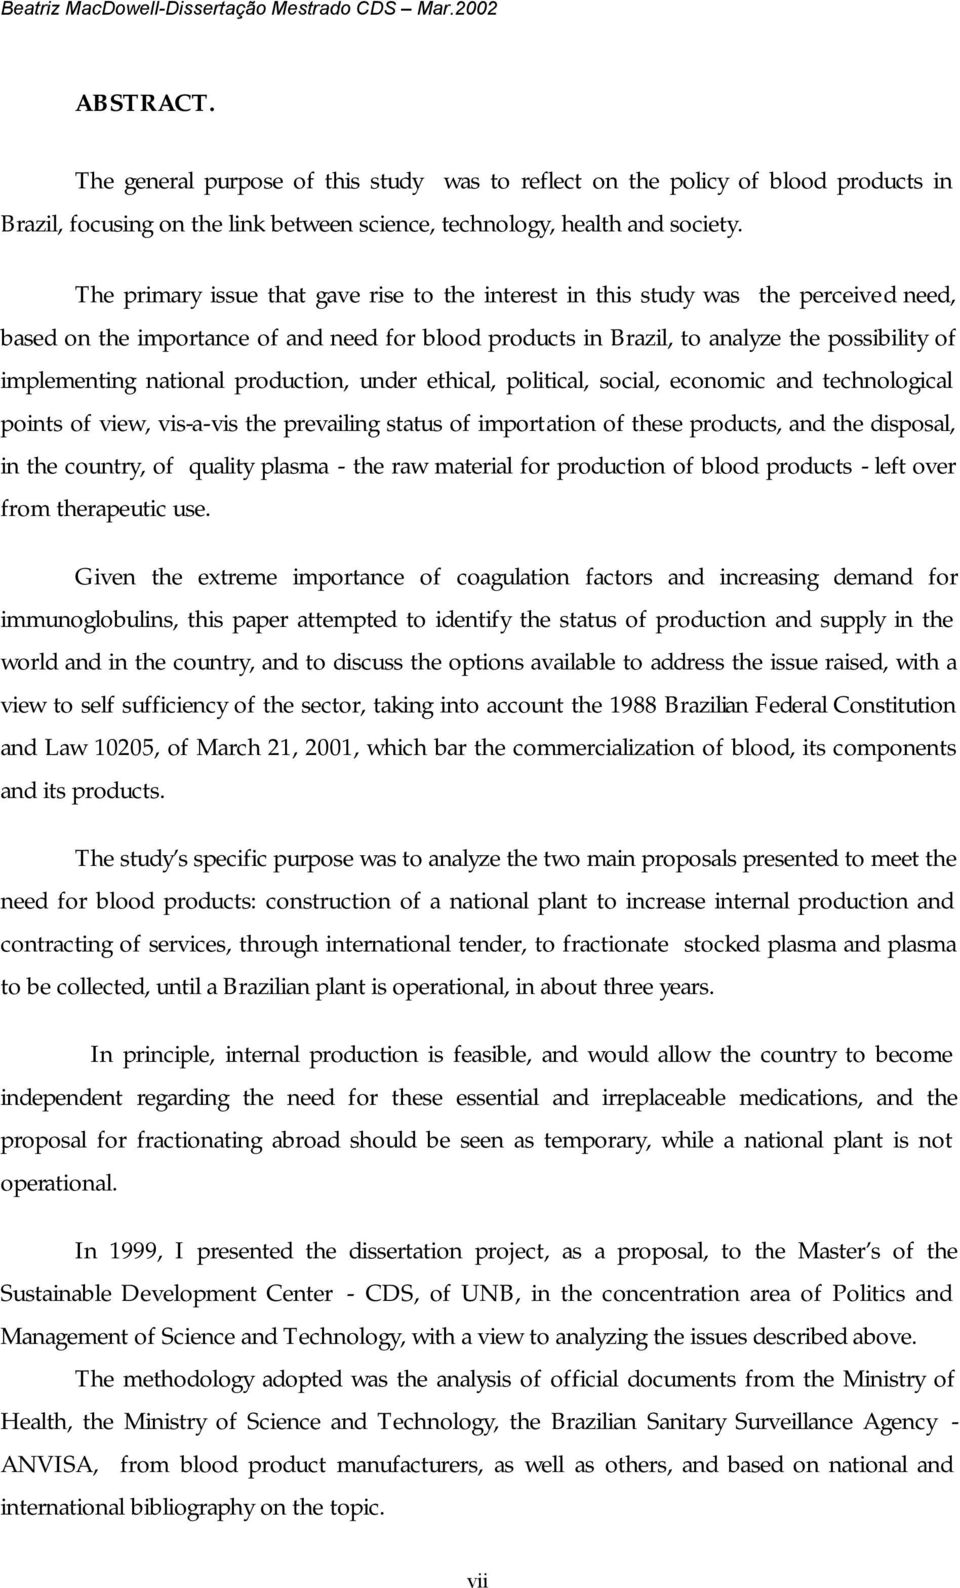 national production, under ethical, political, social, economic and technological points of view, vis-a-vis the prevailing status of importation of these products, and the disposal, in the country,